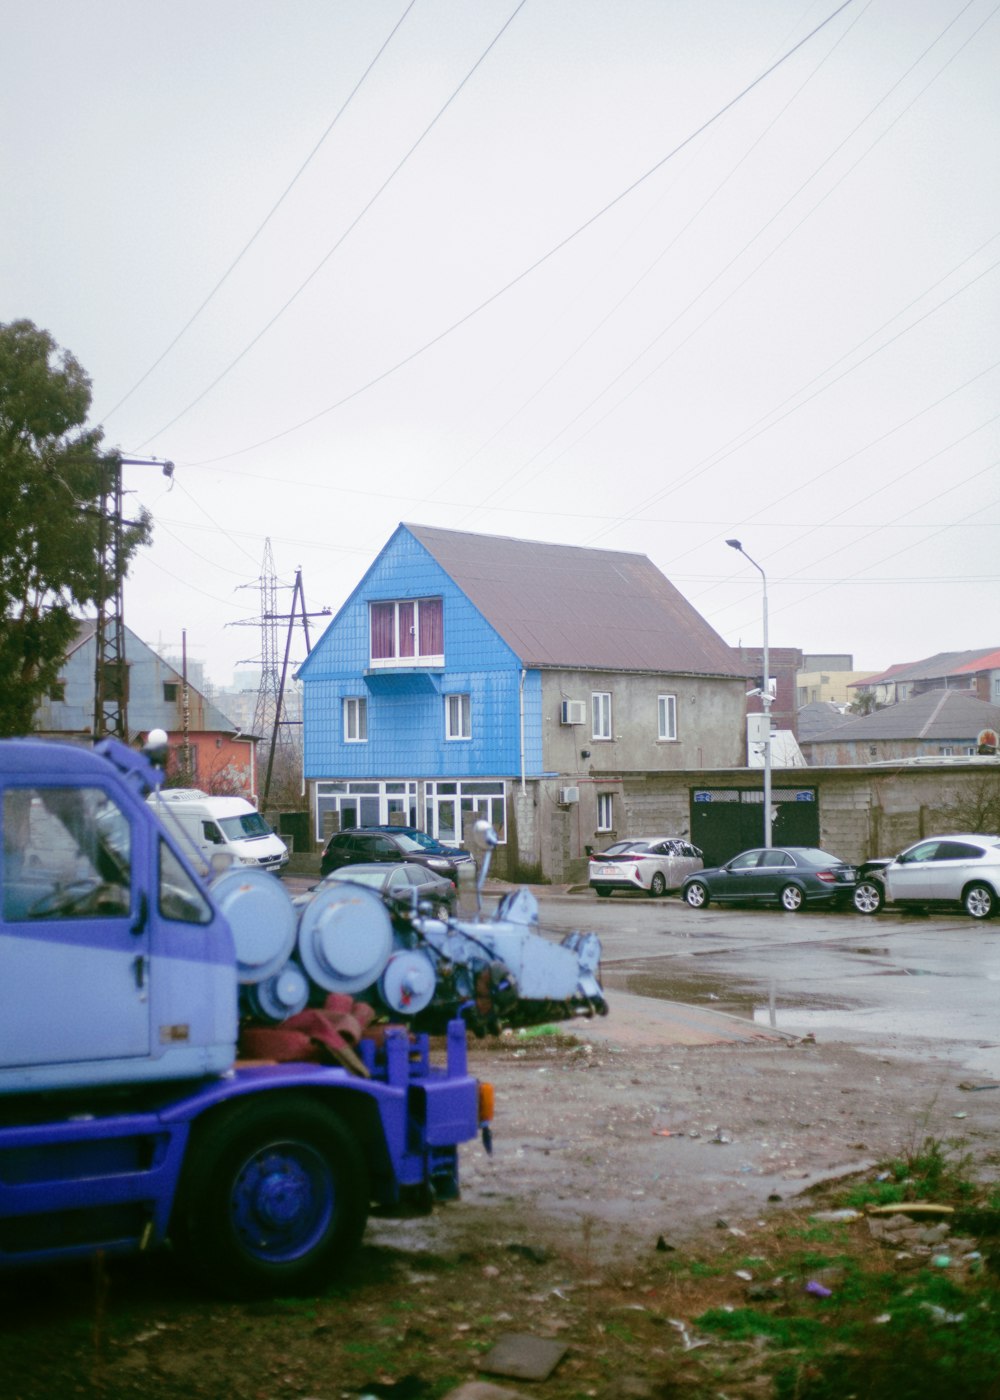 a blue truck parked in front of a blue house